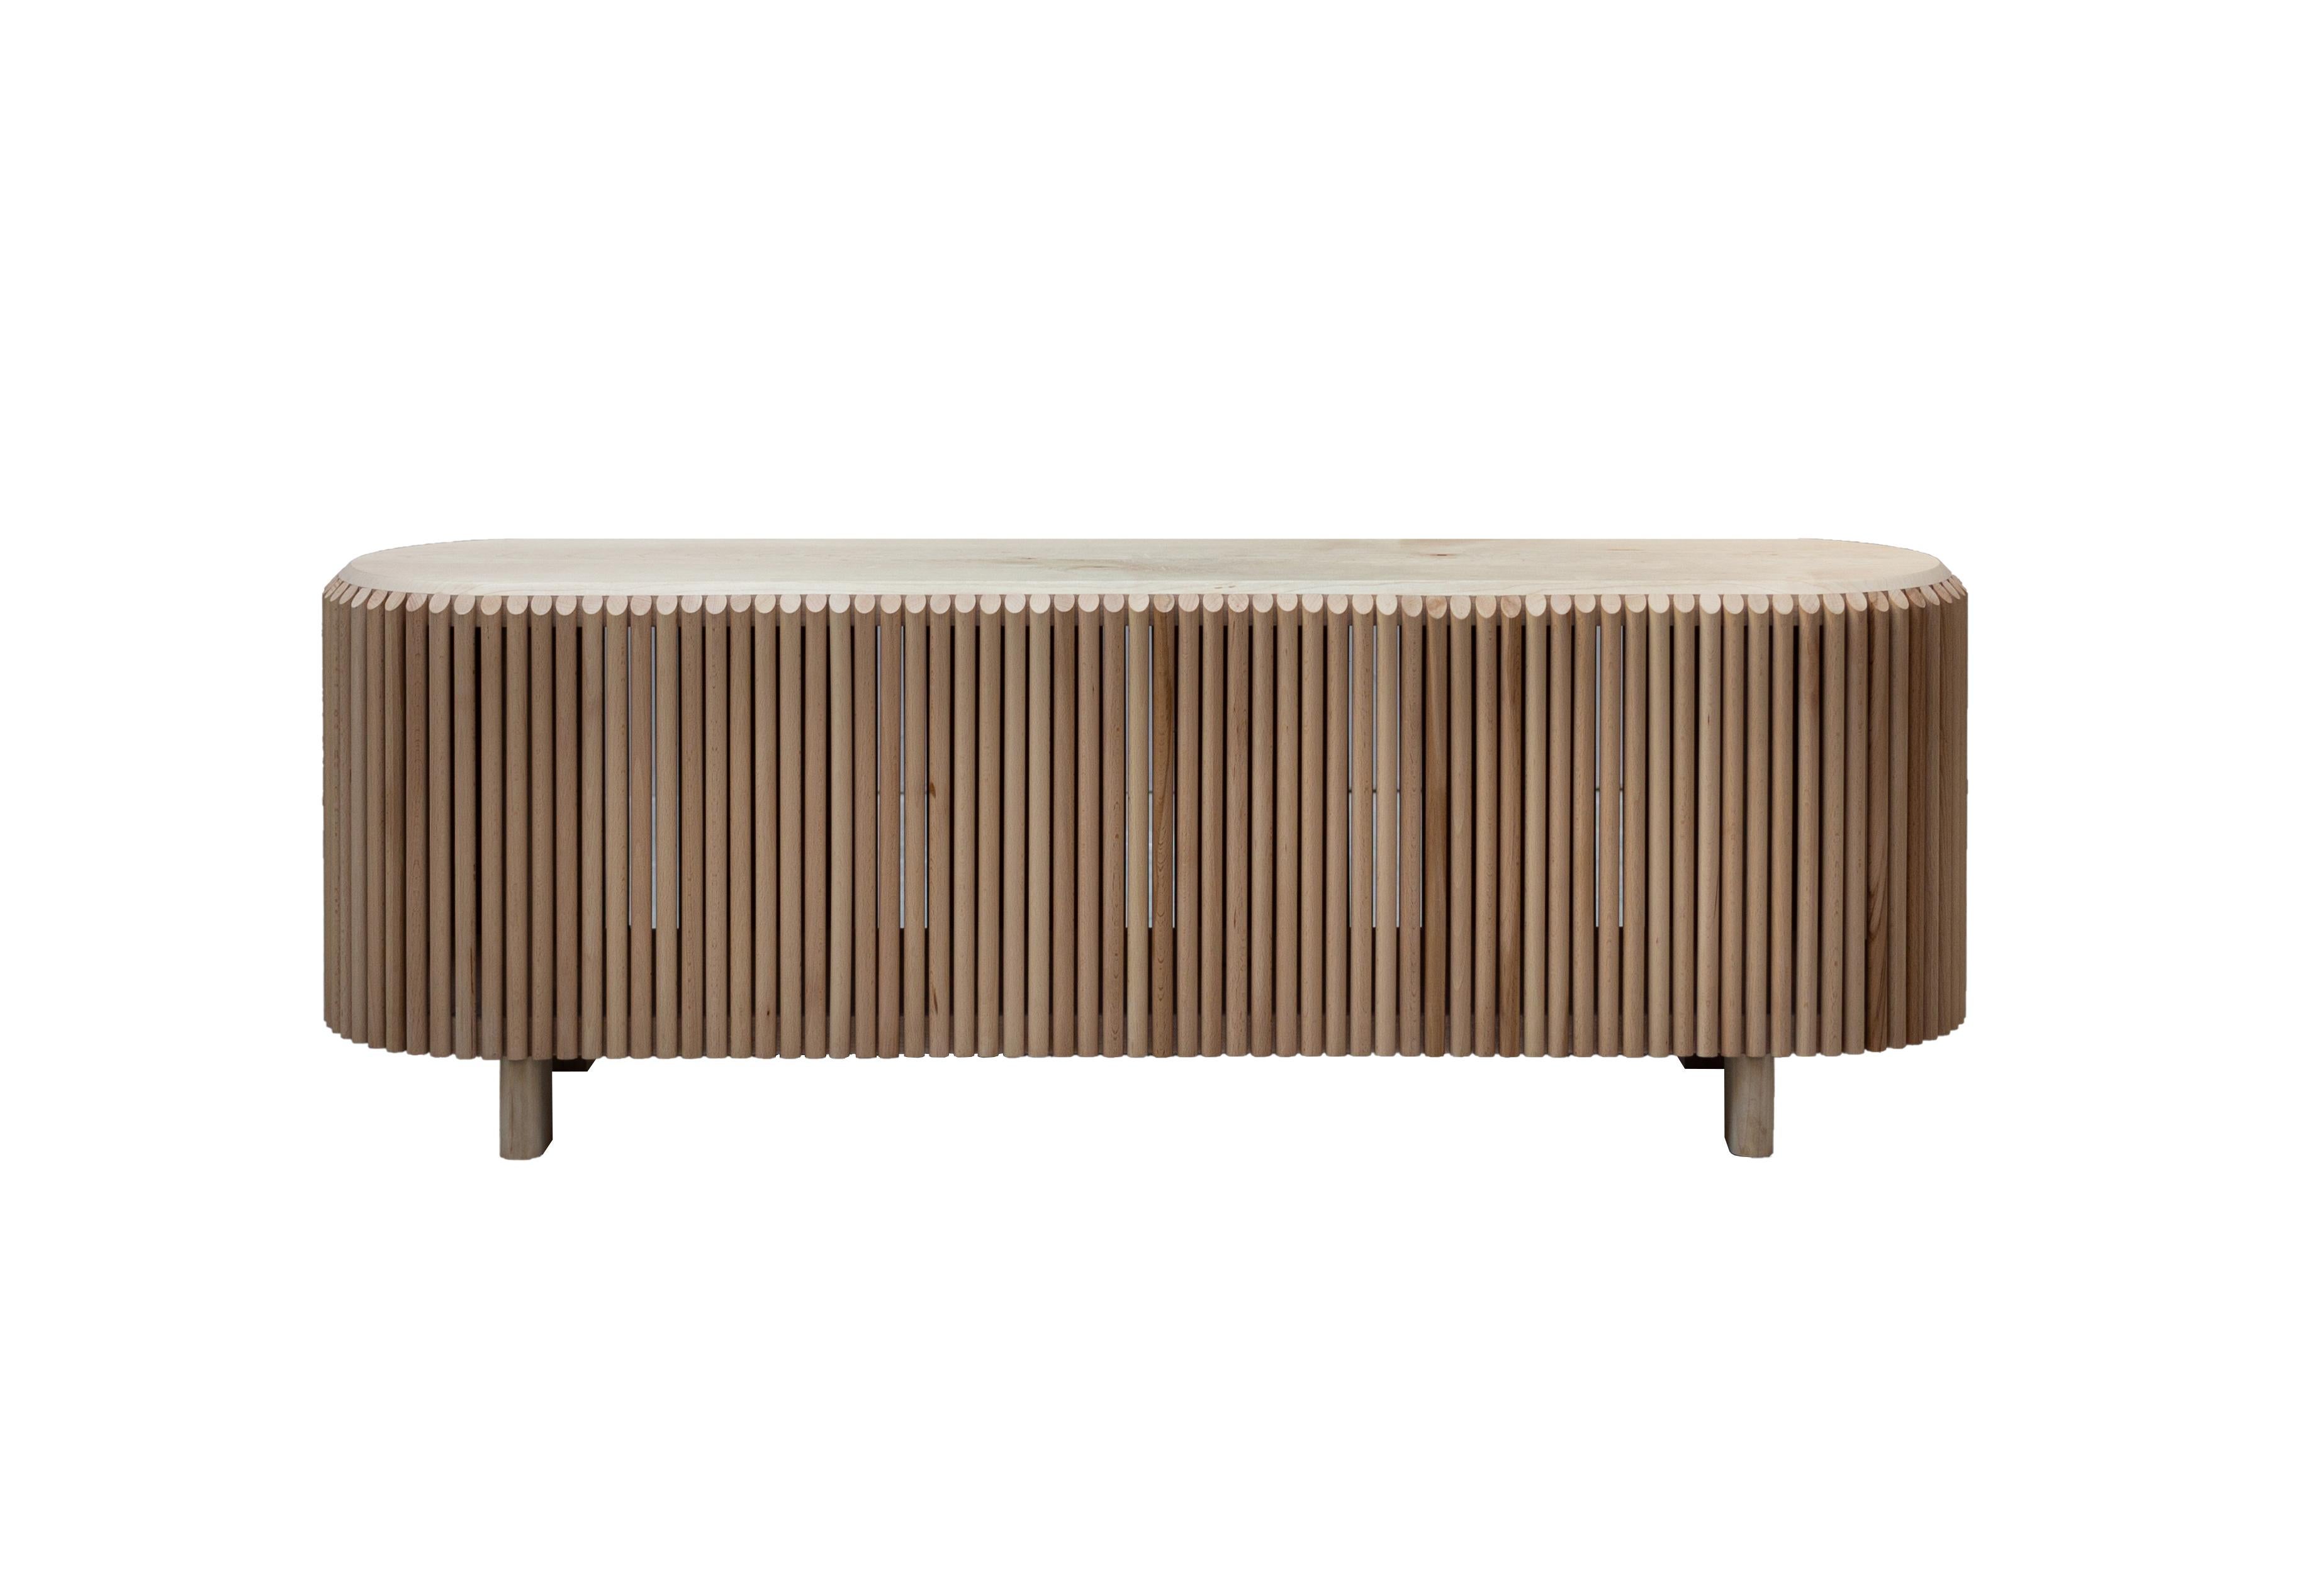 Roseaux bench by Alexandre Labruyère
Current Production
Dimensions: D 136 x W 36 x H 45 cm
Materials: Sycamore, beech / natural oil protection.

Like a curtain of reeds, the rhythm created by the beech stems lets the light filter through and